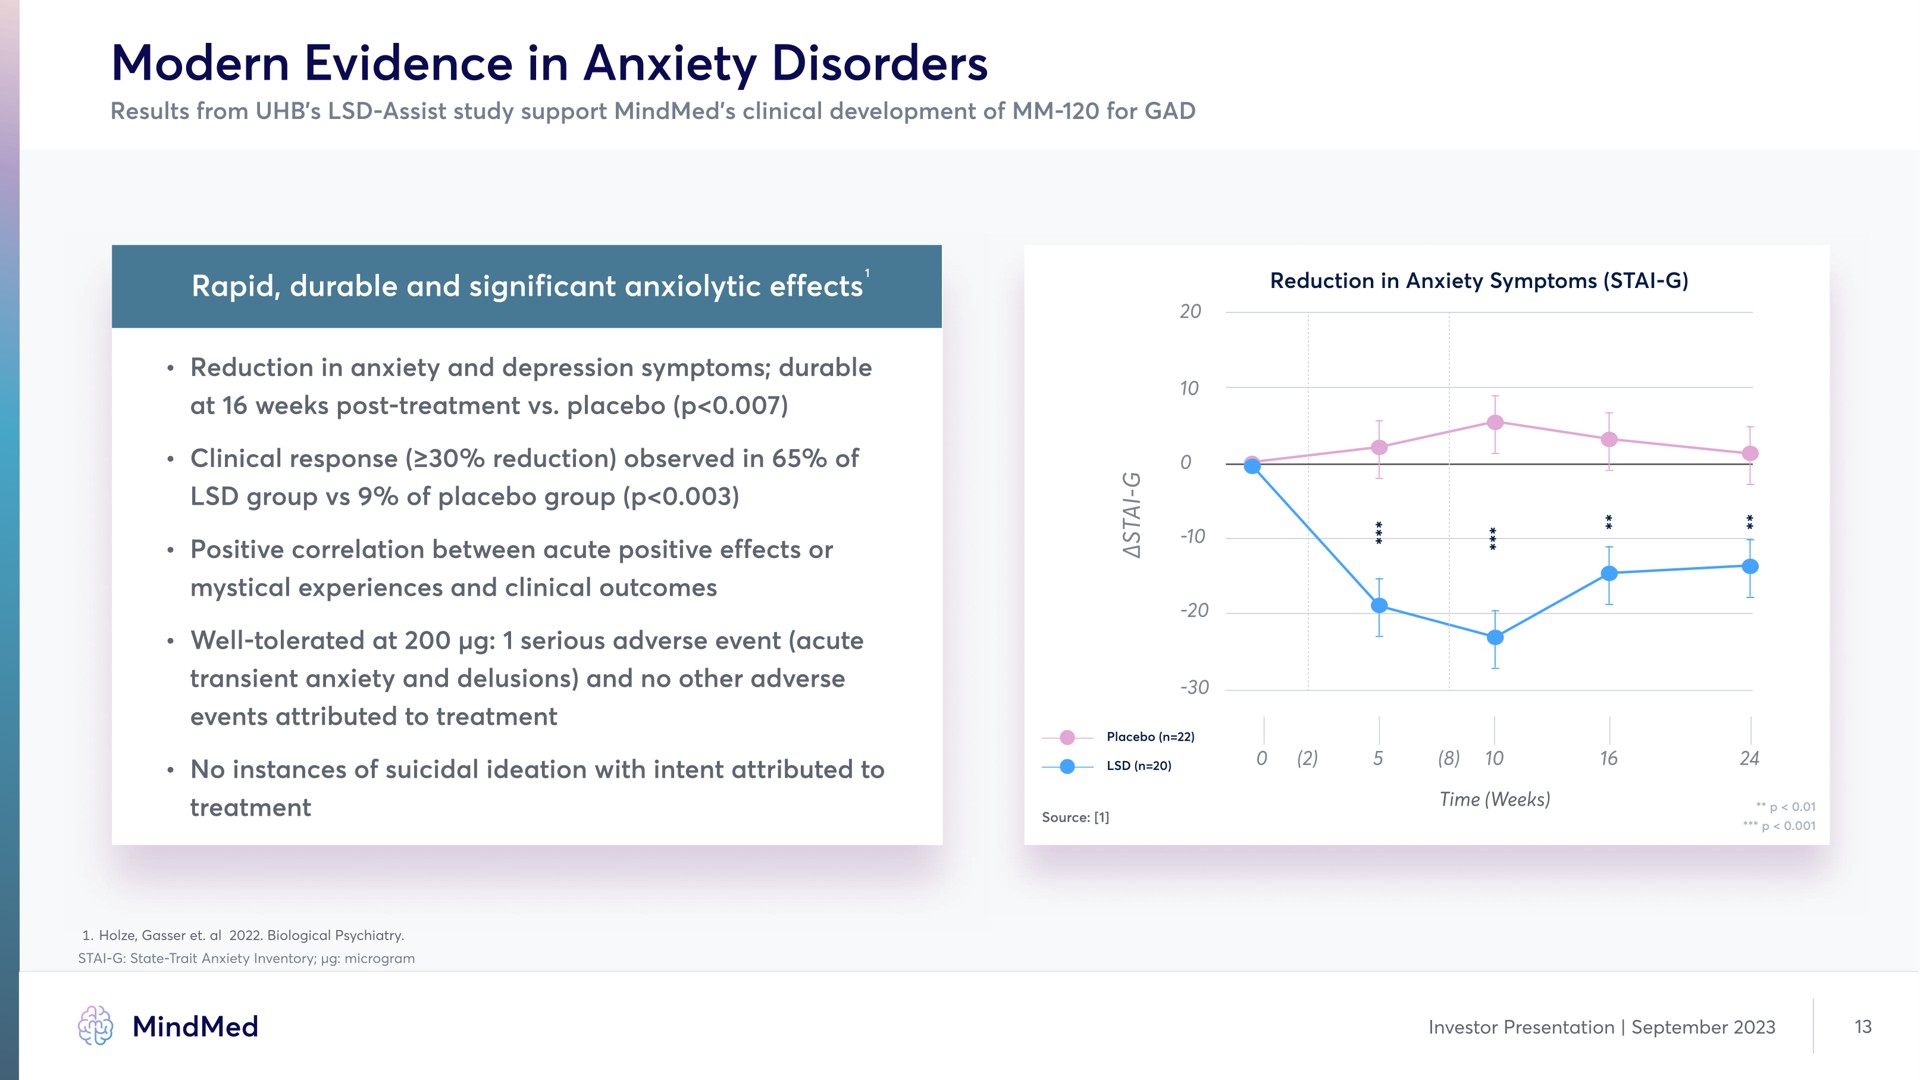 modern evidence in anxiety disorders rapid durable and significant effects reduction symptoms | MindMed